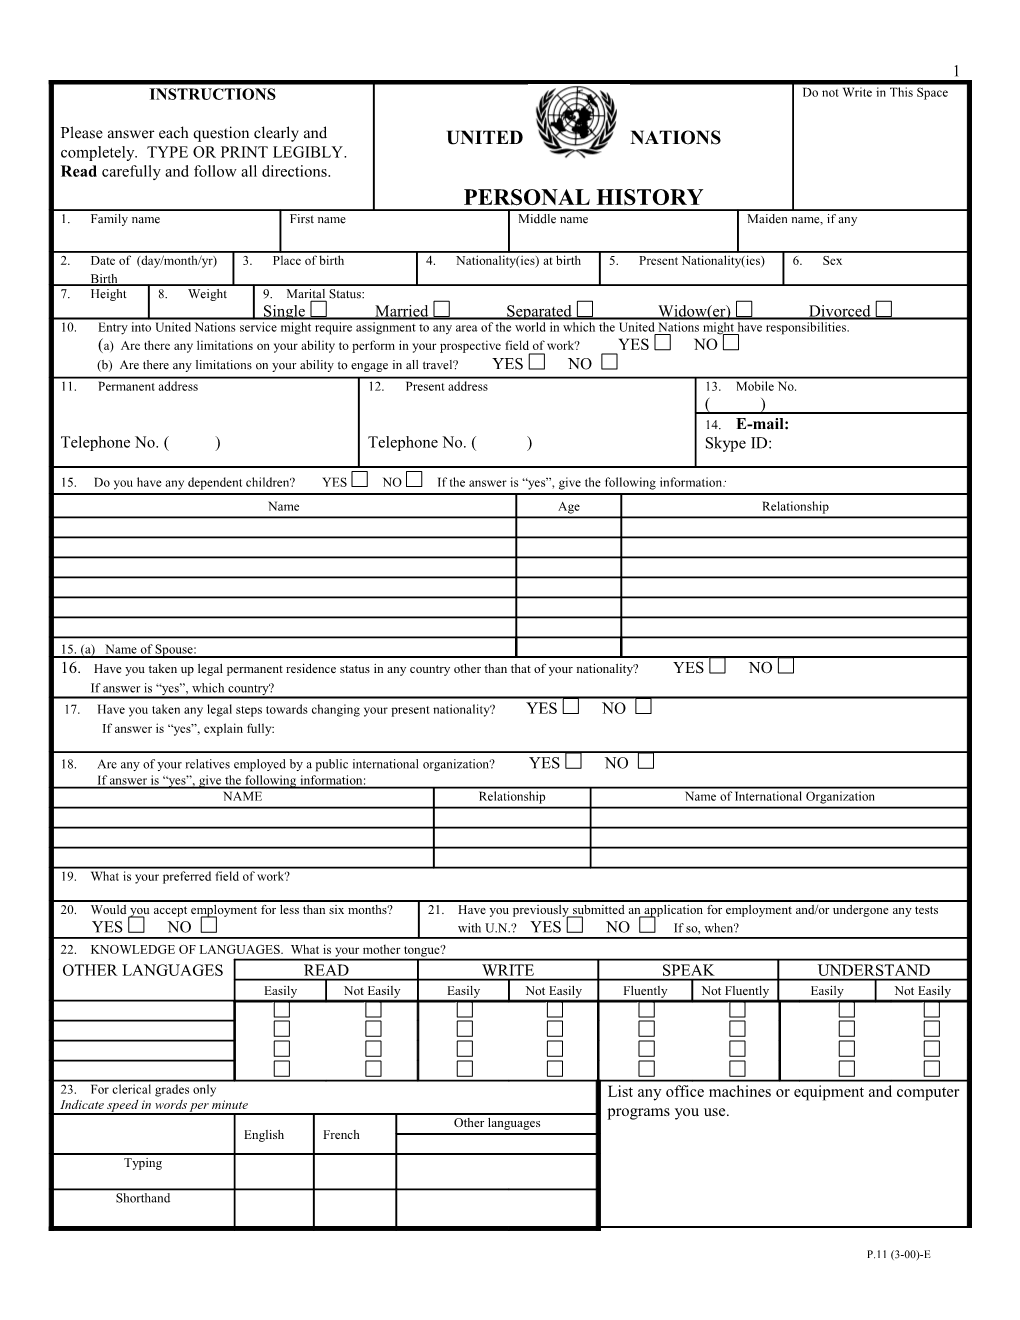 UN Personal History Form PHP P11 s1